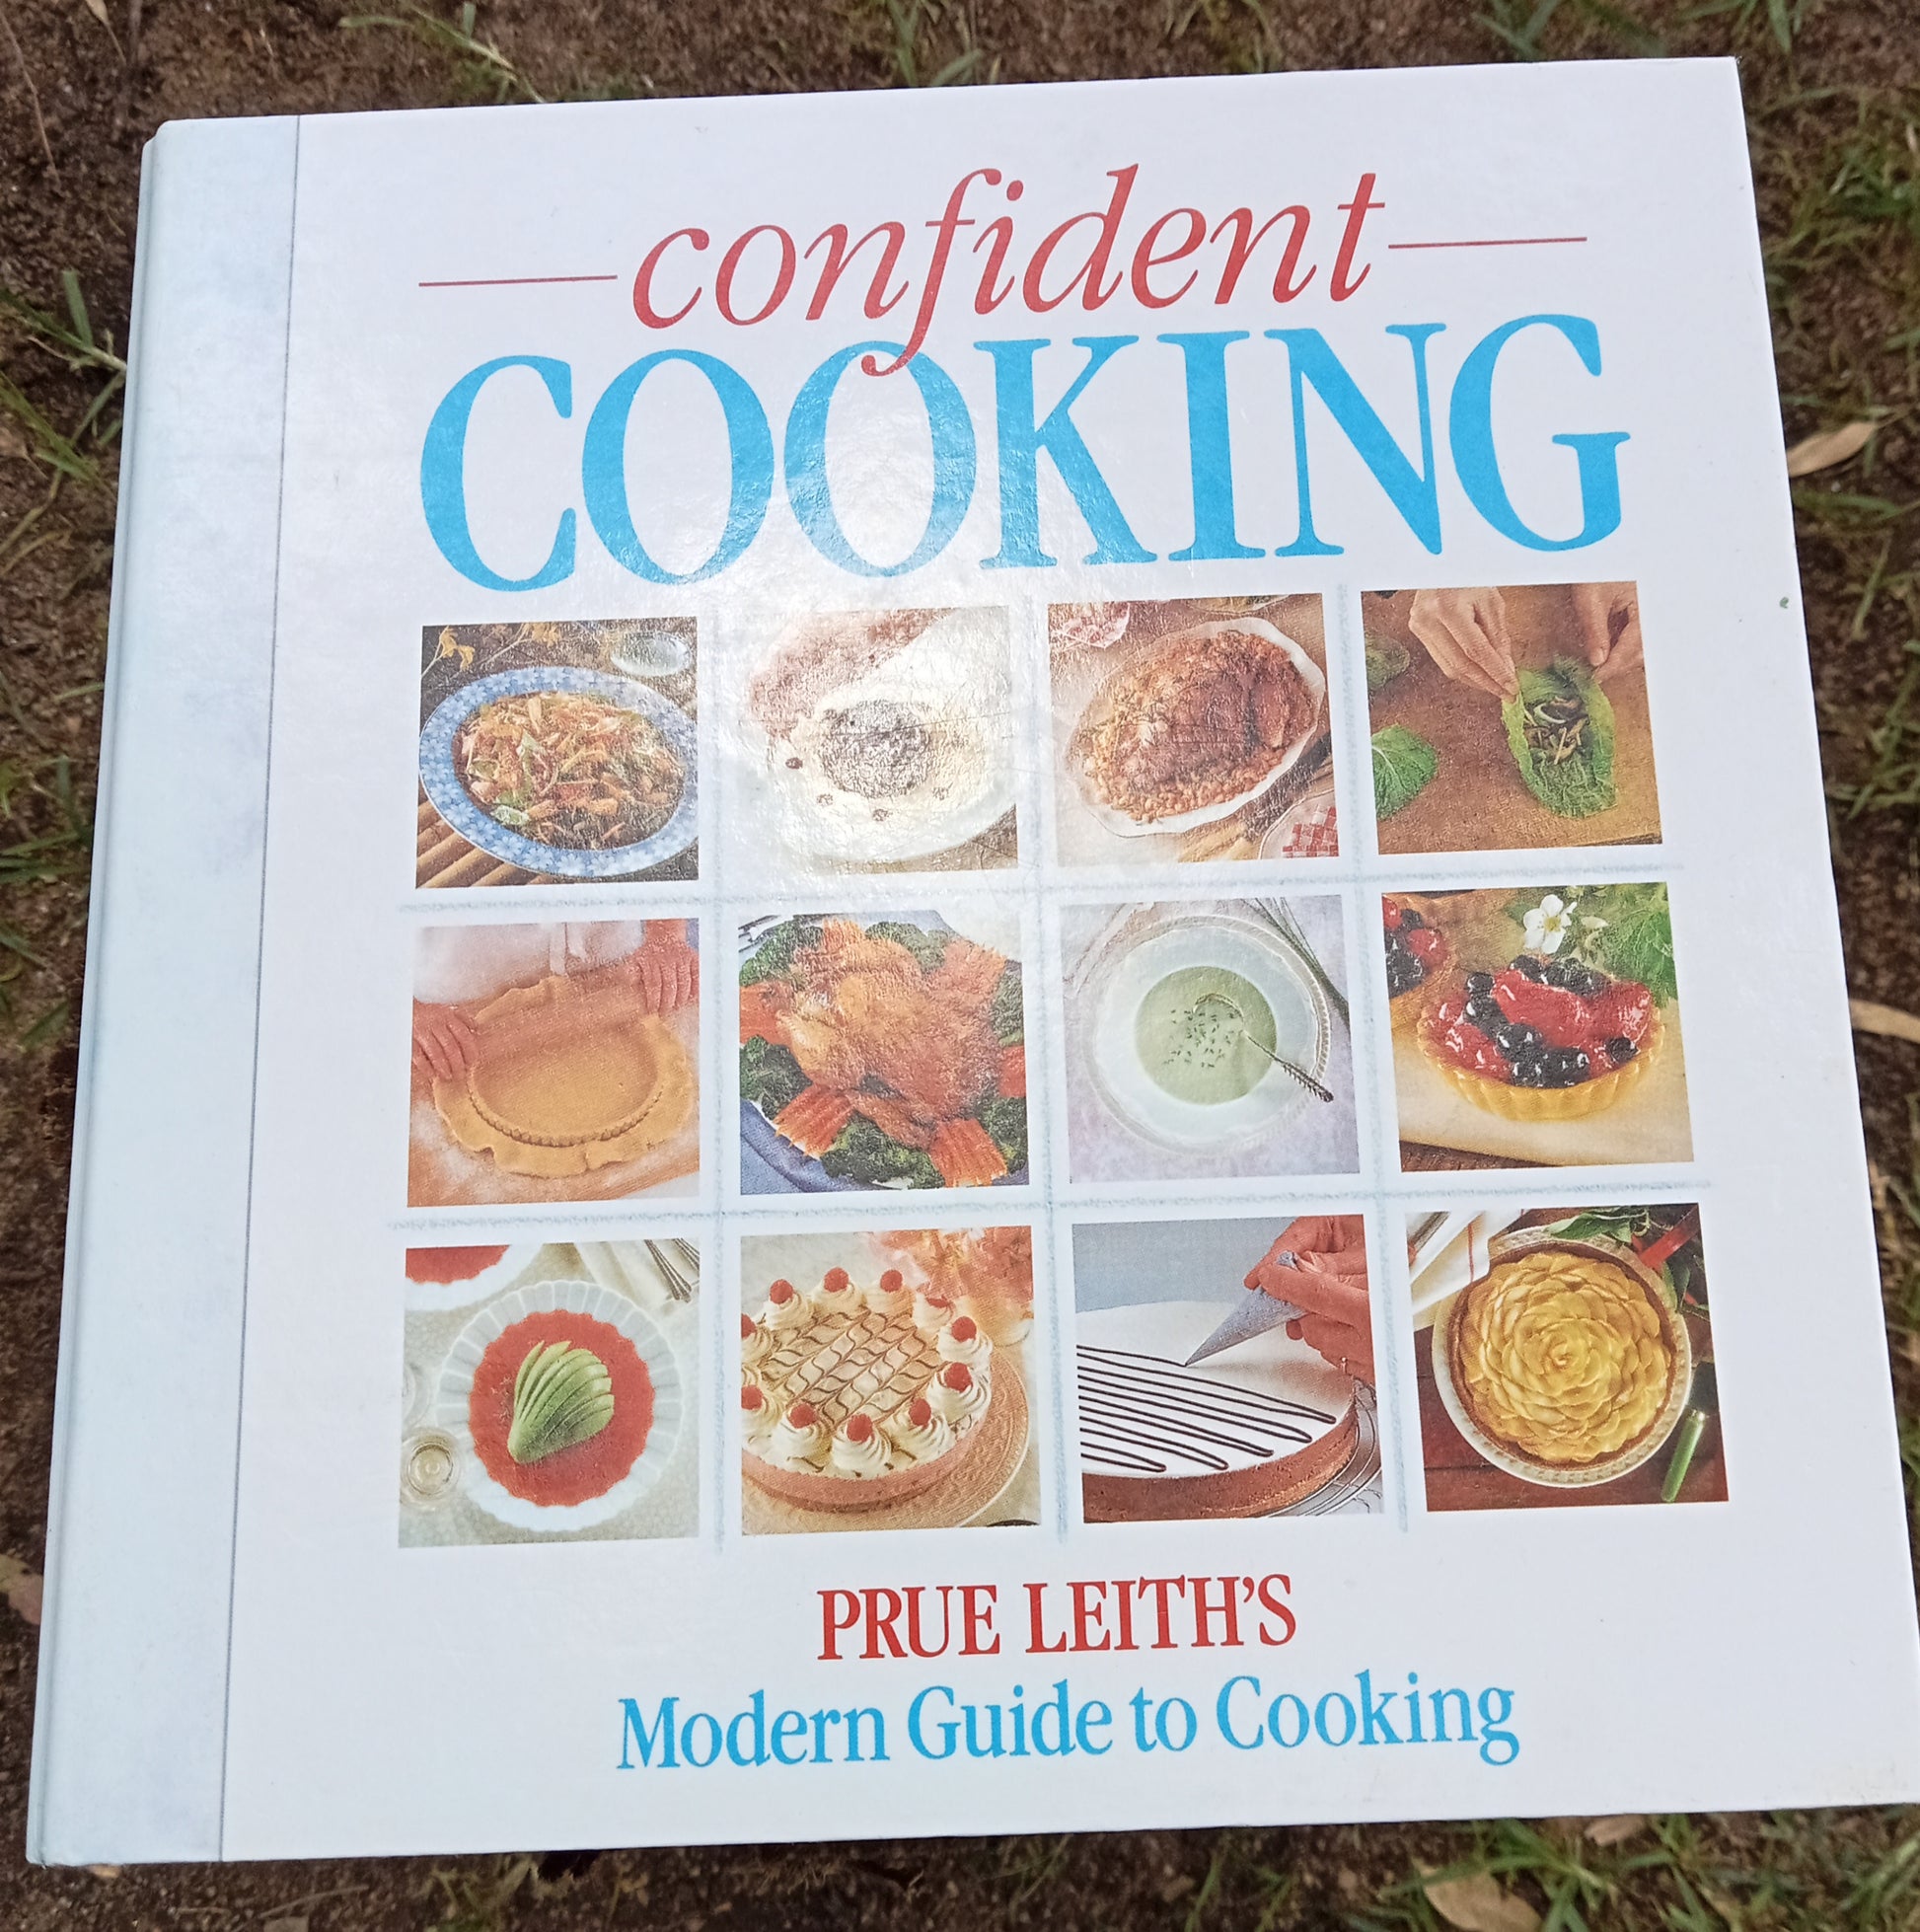 Cooking recipes